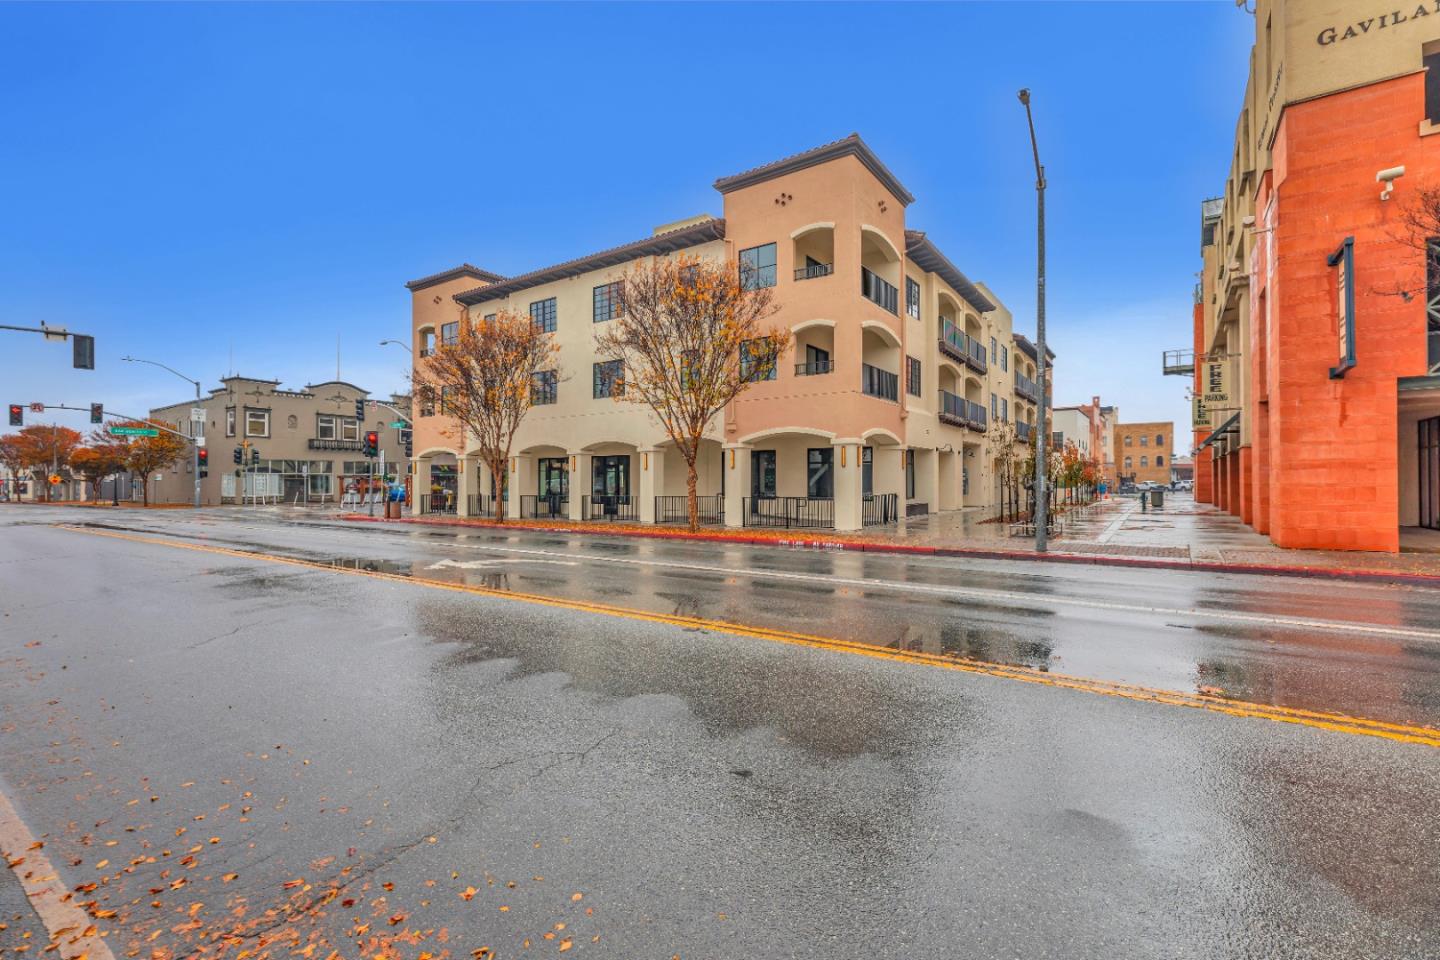 Photo of 400 San Benito St #202 in Hollister, CA